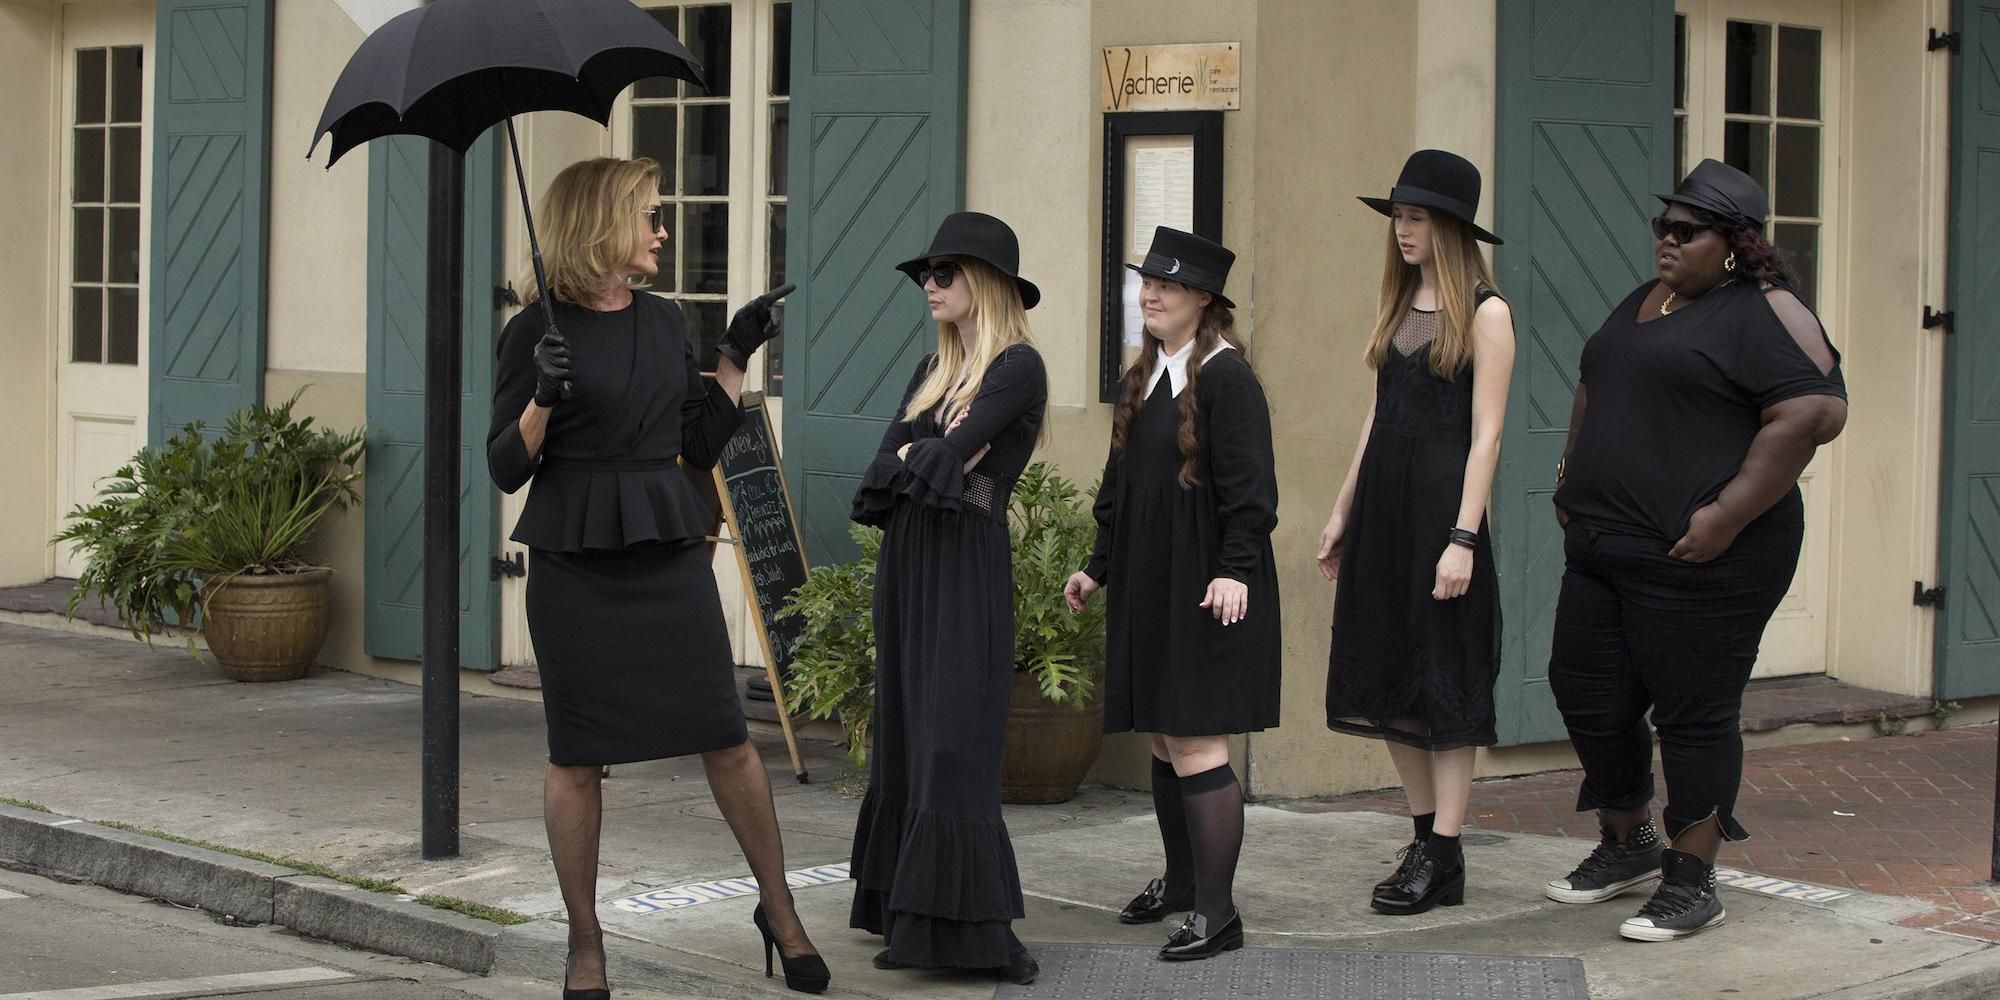 Cordelia and the girls from the coven walking down the street in American Horror Story: Coven.